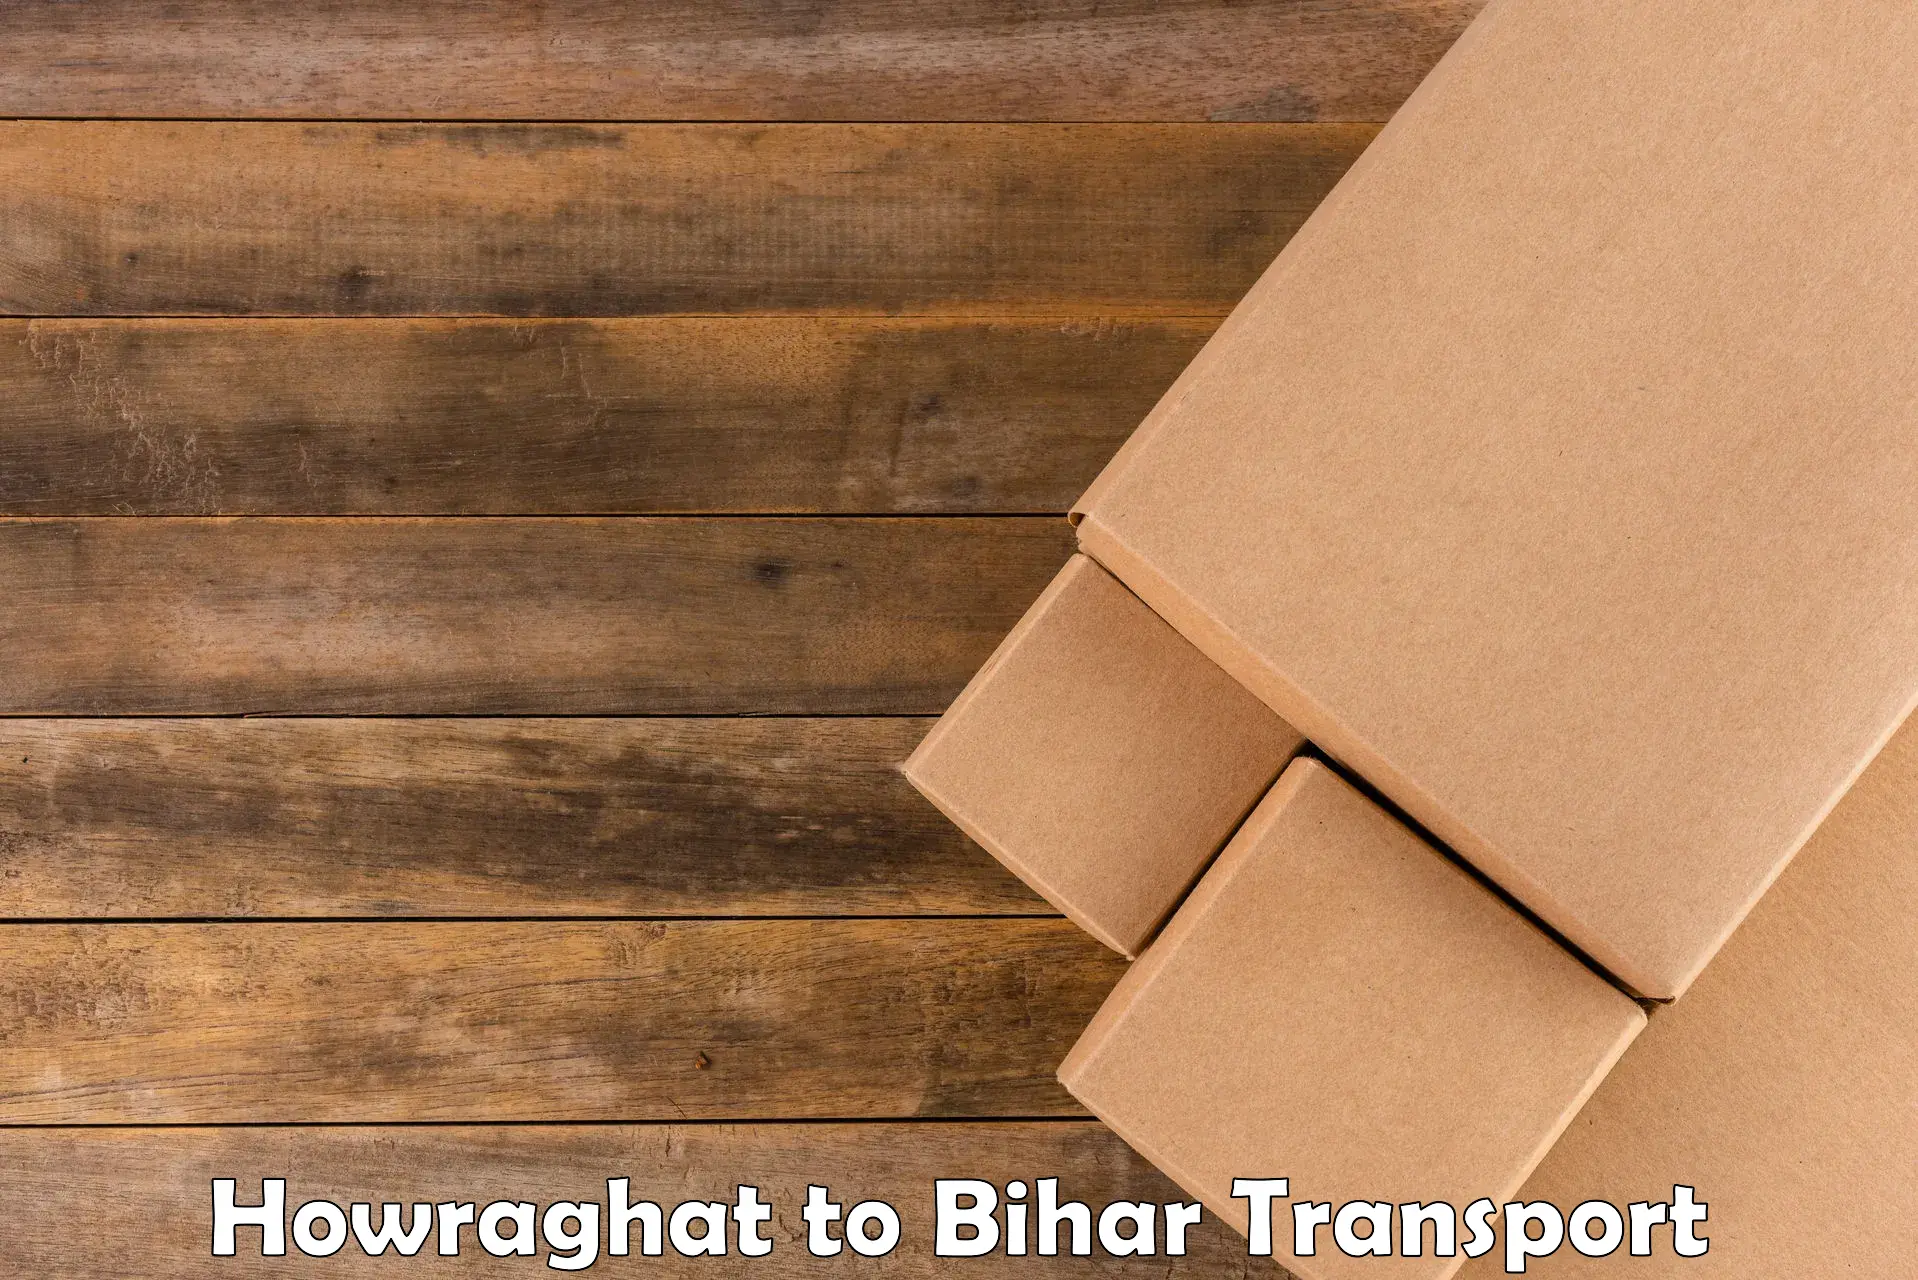 Air freight transport services Howraghat to Mohiuddin Nagar